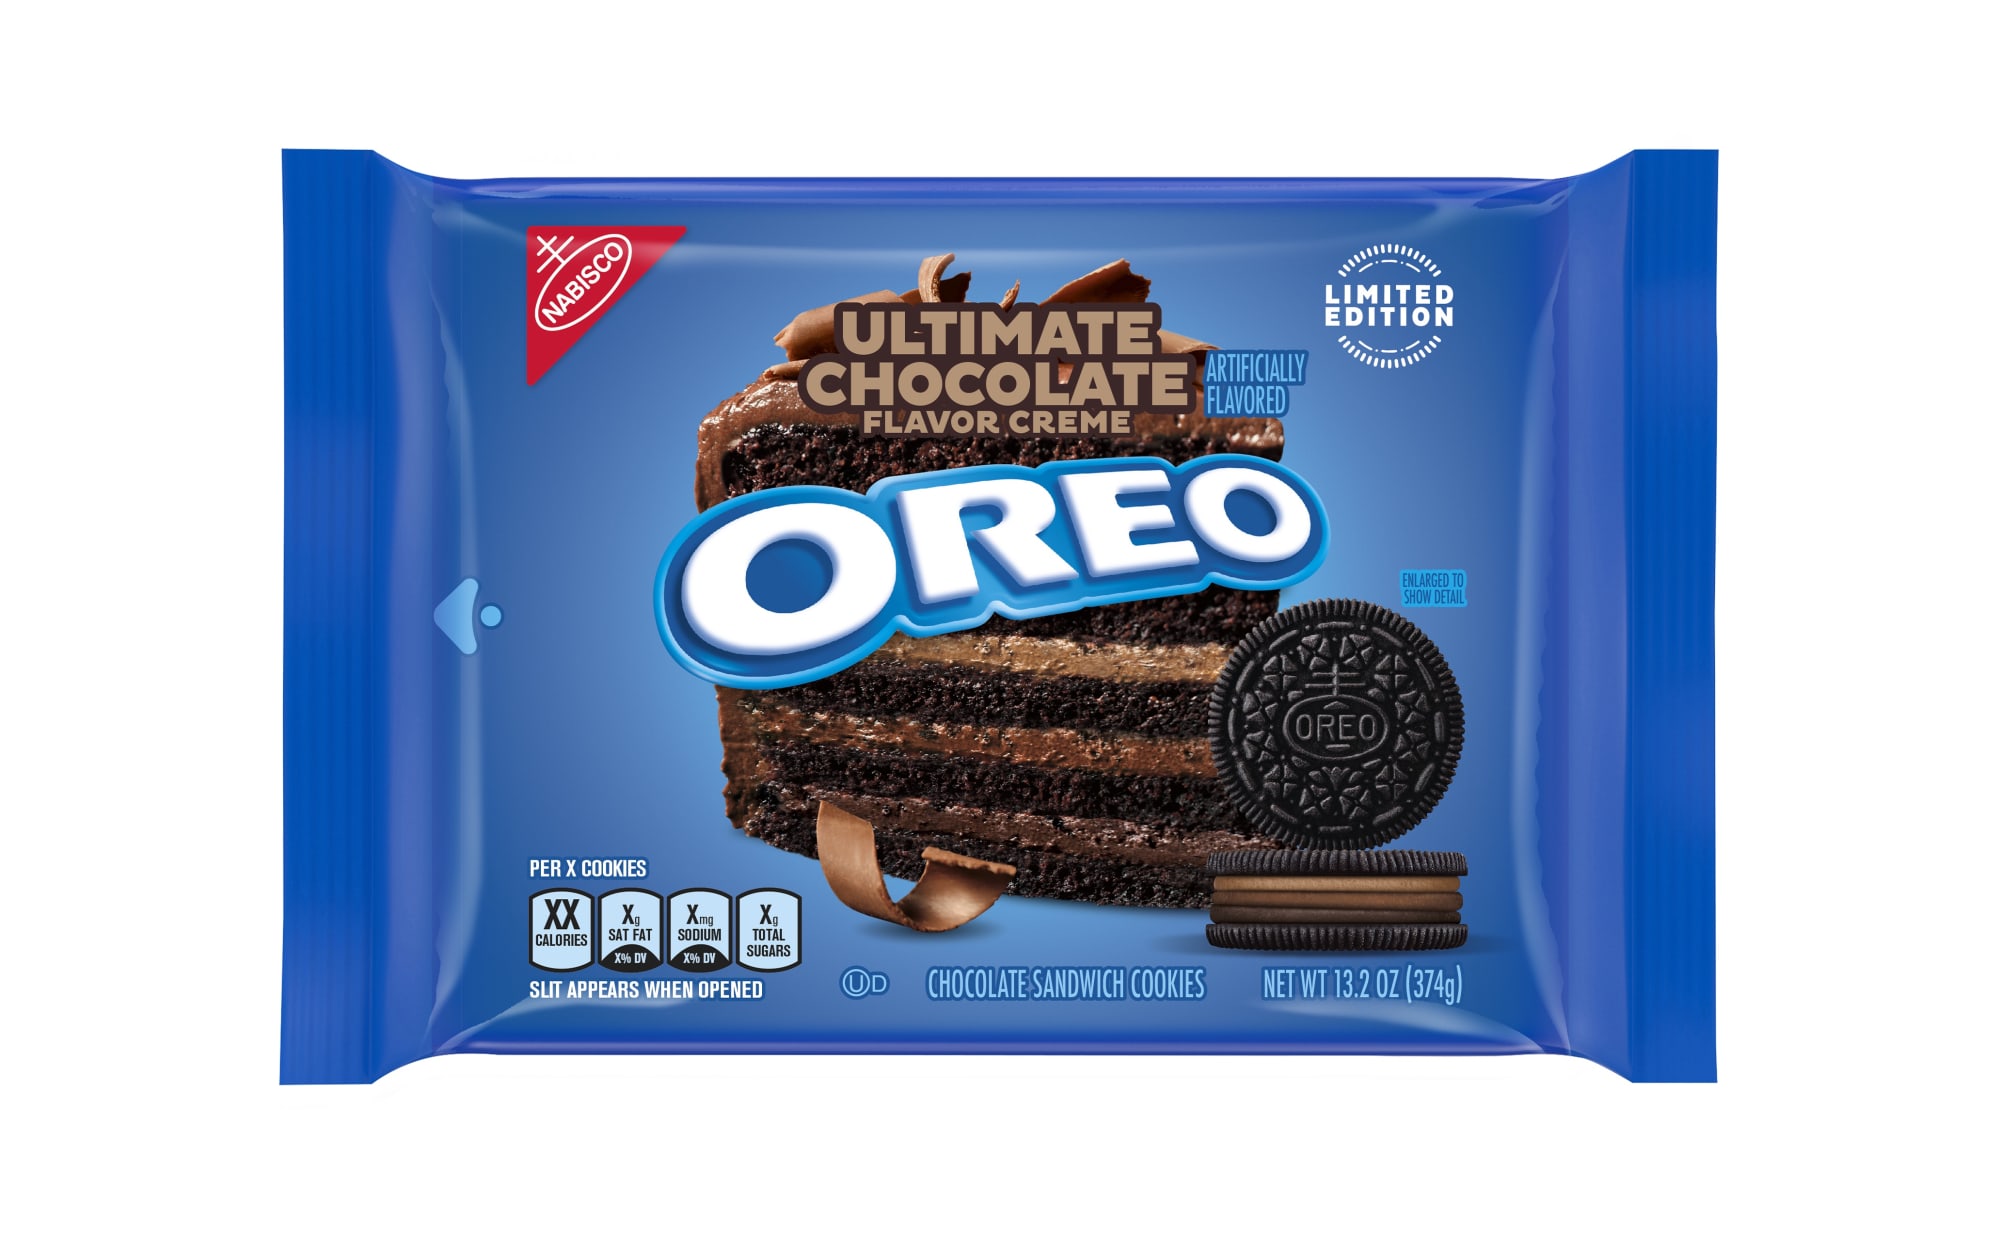 Toffee Crunch and Ultimate Chocolate Oreo flavors coming in January